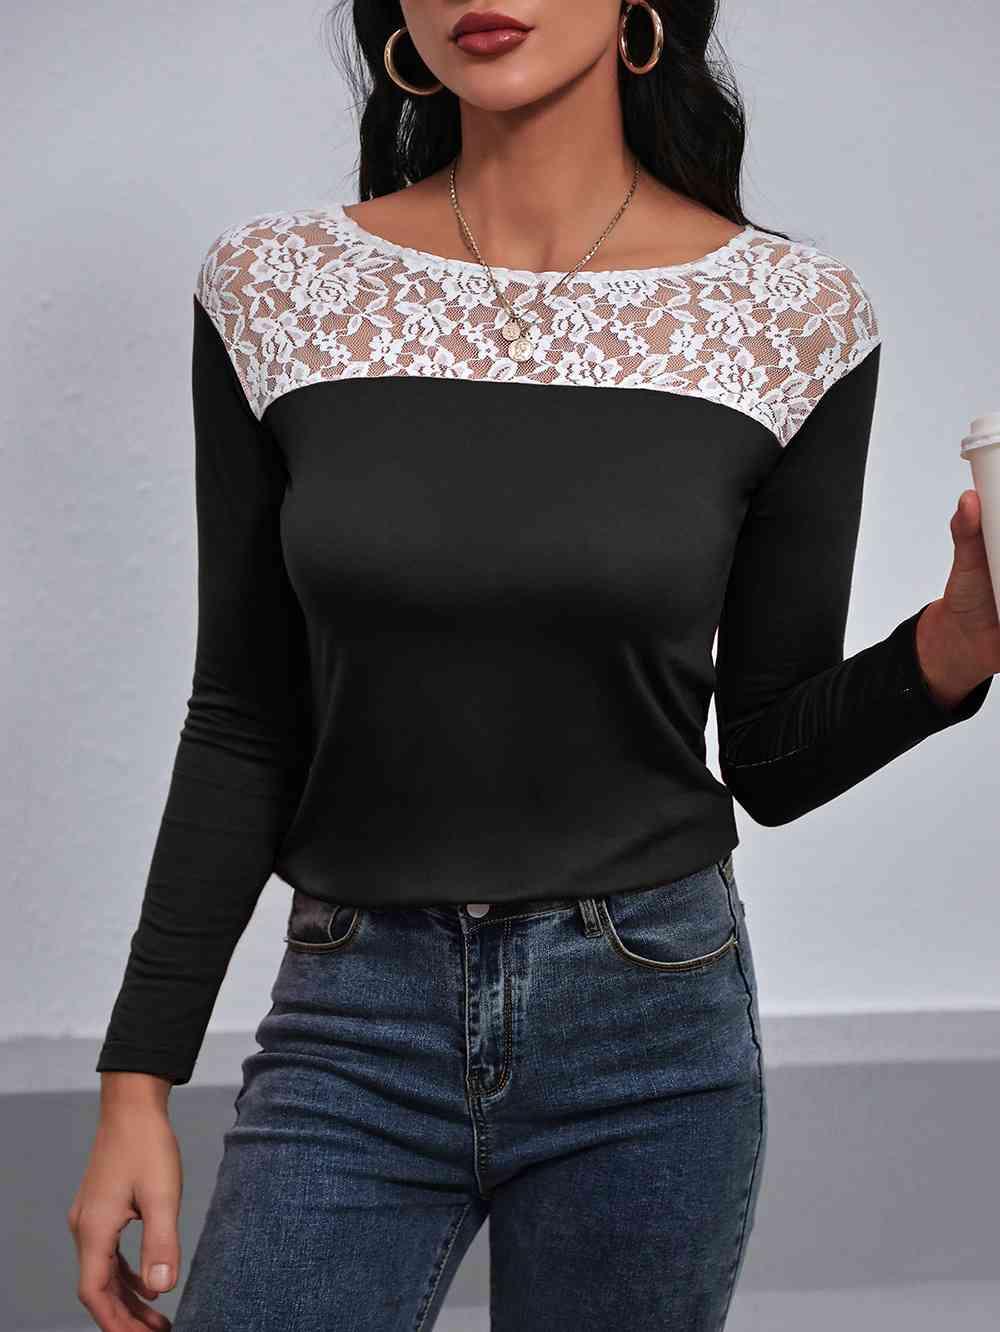 a woman wearing a black and white top